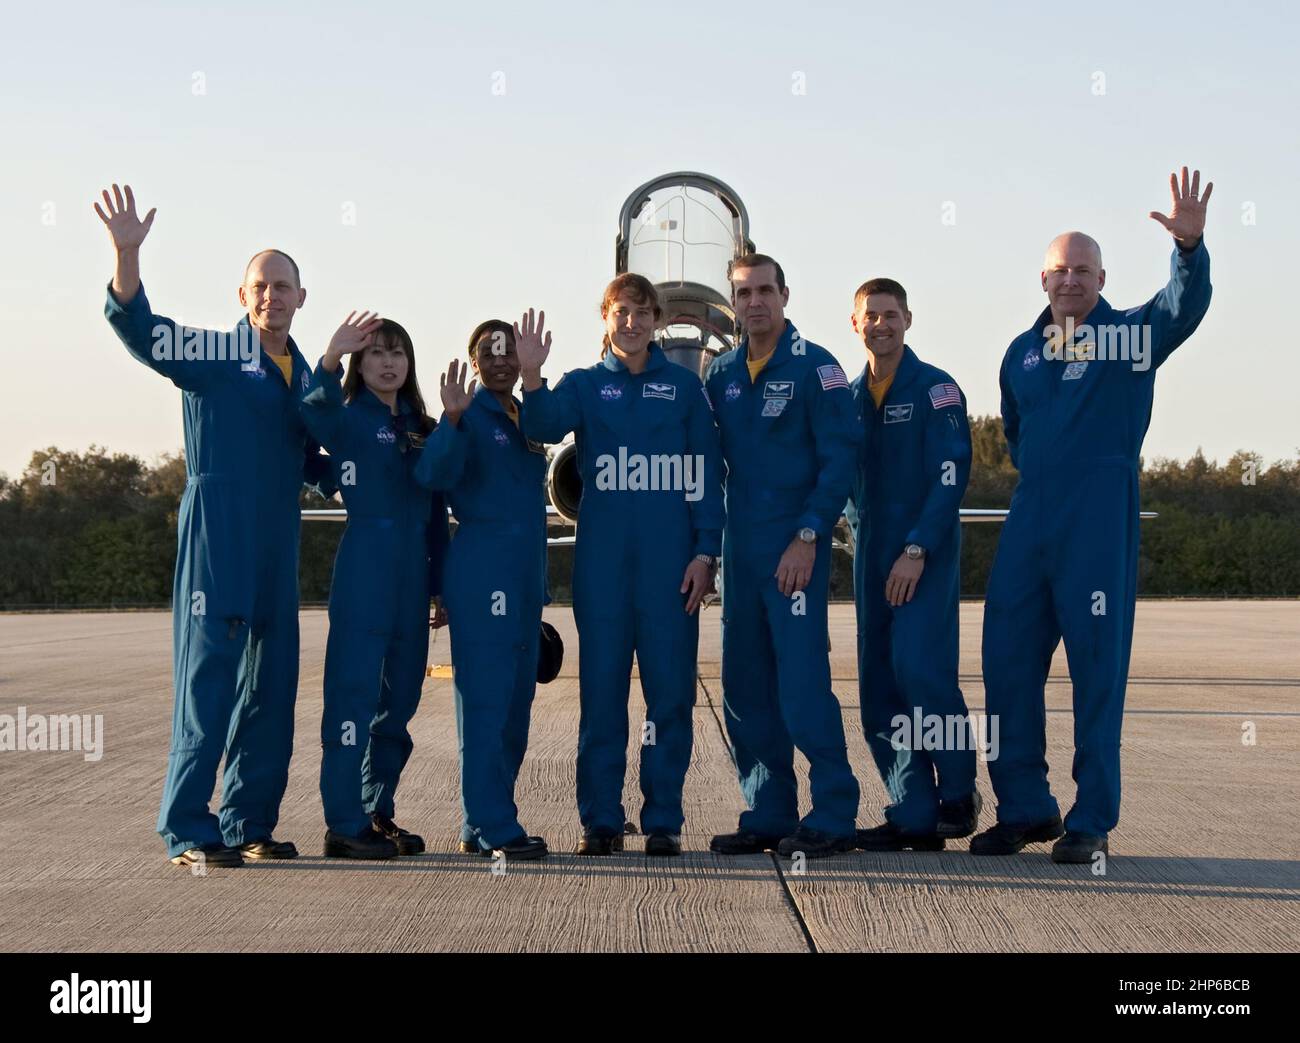 The STS-131 crew members wave at representatives from the media on hand for their arrival at the Shuttle Landing Facility at NASA's Kennedy Space Center in Florida. From left are Mission Specialist Clayton Anderson; Japan Aerospace Exploration Agency astronaut Naoko Yamazaki; Mission Specialists Stephanie Wilson, Dorothy Metcalf-Lindenburger and Rick Mastracchio; Pilot James P. Dutton Jr.; and Commander Alan Poindexter ca. 2010 Stock Photo